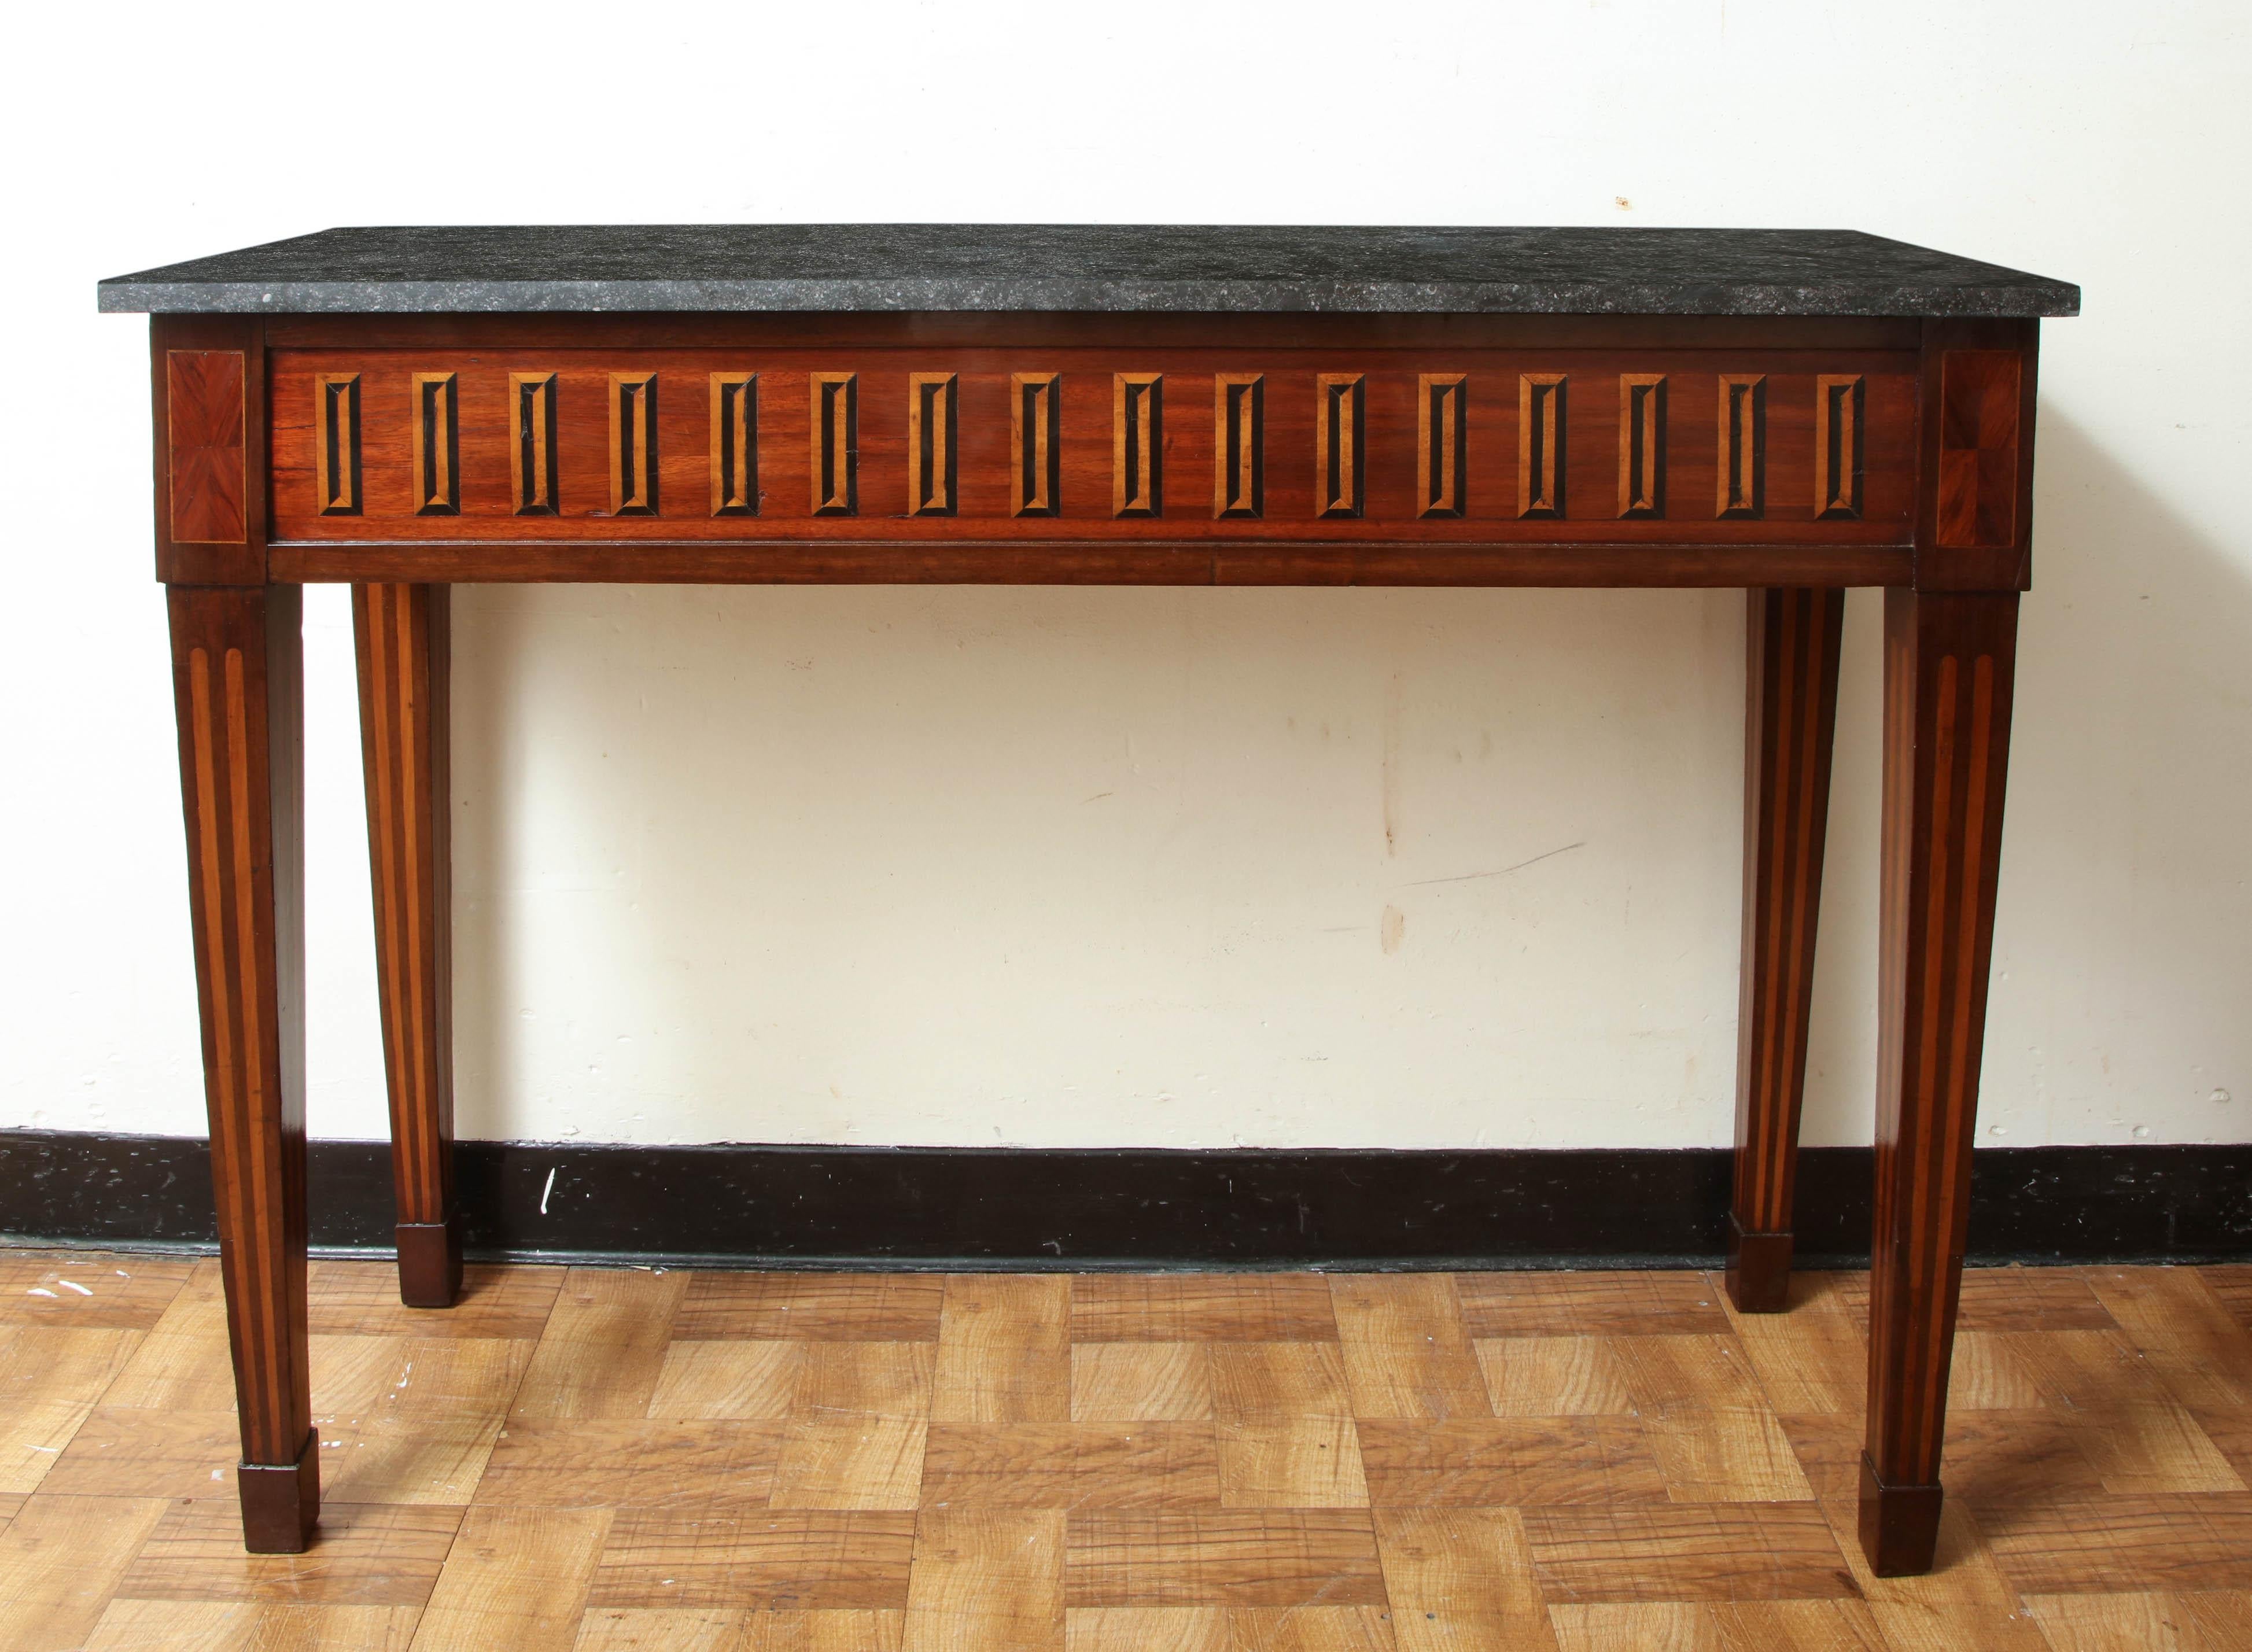 Early 19th century console table with inlaid apron of ebony and rosewood with tapering legs and Belgian Bluestone top. Italy, circa 1810.



Available to see in our NYC Showroom 
BK Antiques
306 East 61st St. 2nd fl.
New York, NY 10065